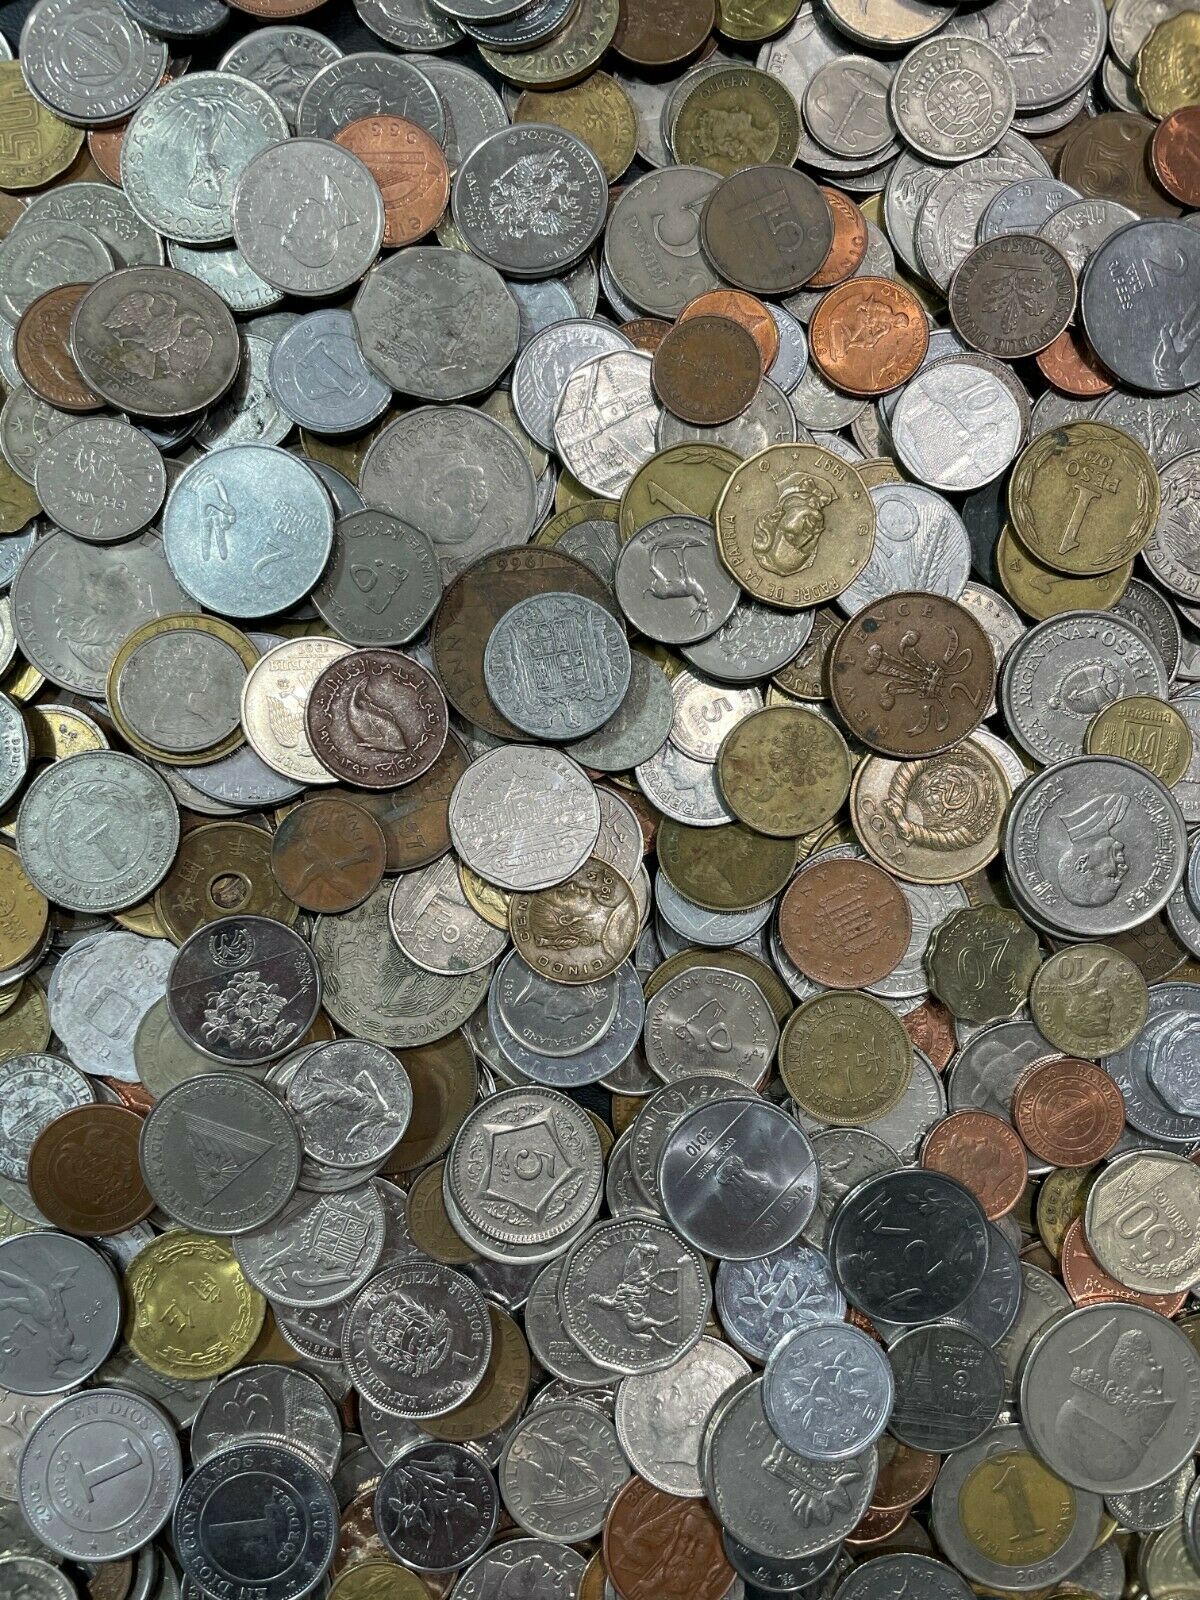 Large Bulk Mixed Lot Of 100 Assorted Foreign Coins From Around The World!